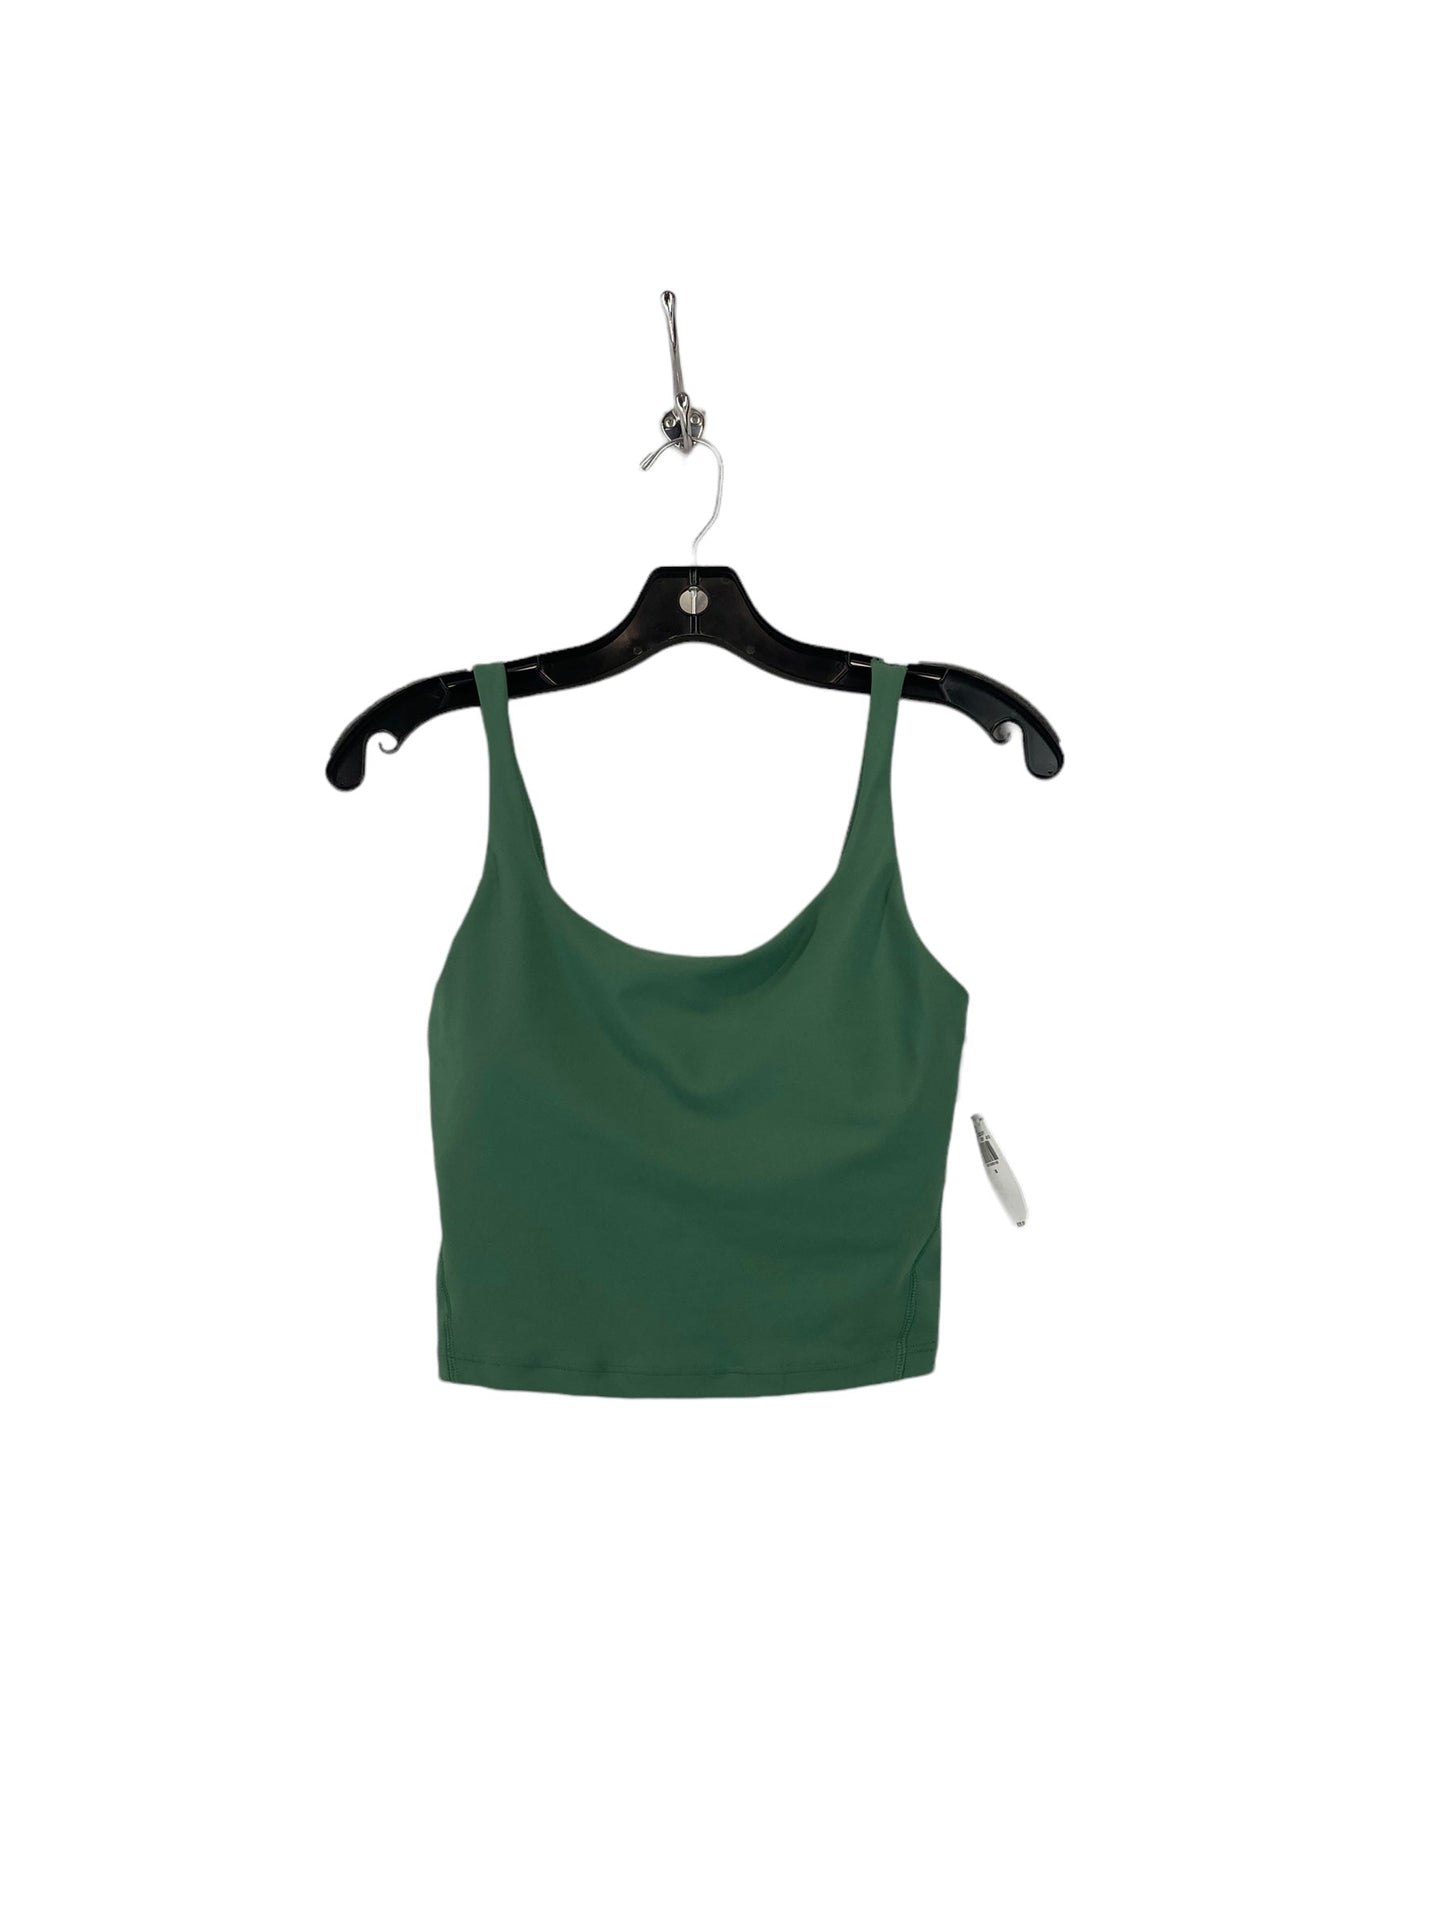 Green Athletic Tank Top Old Navy, Size S